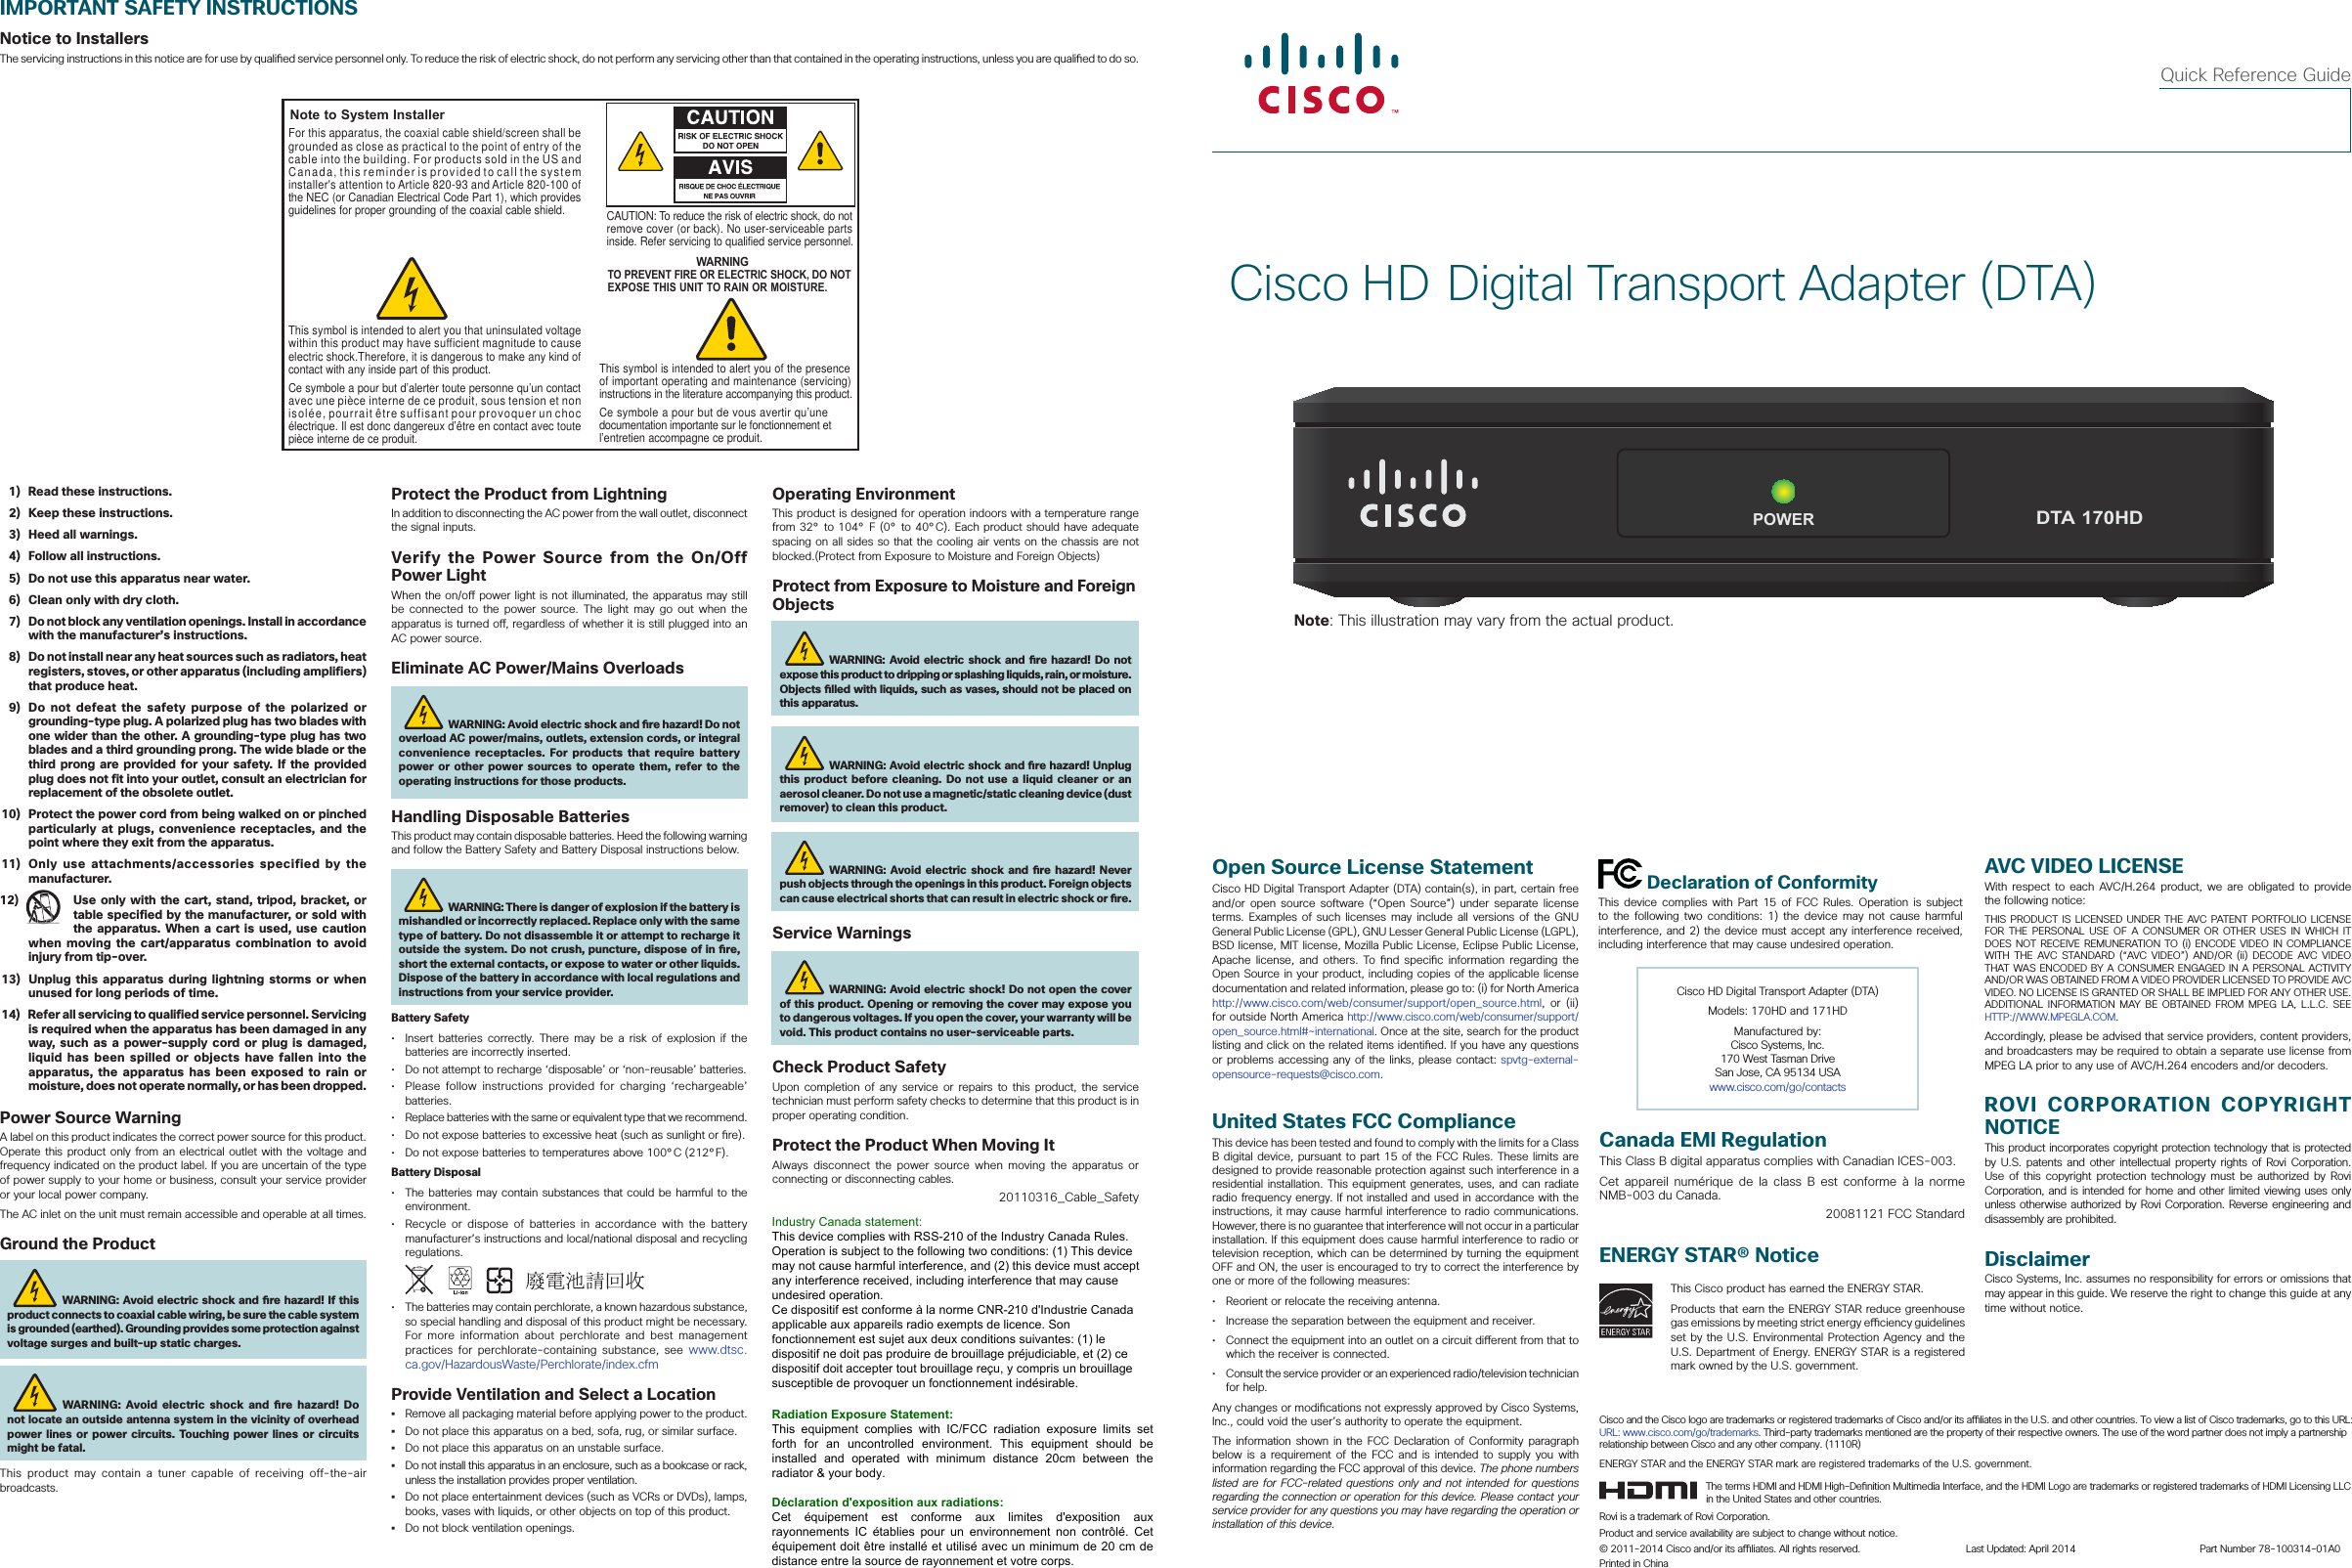 Cisco HD Digital Transport Adapter (DTA)Quick Reference GuideIMPORTANT SAFETY INSTRUCTIONSNotice to InstallersThe servicing instructions in this notice are for use by quali ed service personnel only. To reduce the risk of electric shock, do not perform any servicing other than that contained in the operating instructions, unless you are quali ed to do so.Note to System InstallerCAUTION: To reduce the risk of electric shock, do notremove cover (or back). No user-serviceable parts inside. Refer servicing to qualified service personnel.WARNINGTO PREVENT FIRE OR ELECTRIC SHOCK, DO NOT EXPOSE THIS UNIT TO RAIN OR MOISTURE.For this apparatus, the coaxial cable shield/screen shall be grounded as close as practical to the point of entry of the cable into the building. For products sold in the US and Canada, this reminder is provided to call the system installer&apos;s attention to Article 820-93 and Article 820-100 of the NEC (or Canadian Electrical Code Part 1), which provides guidelines for proper grounding of the coaxial cable shield.This symbol is intended to alert you that uninsulated voltage within this product may have sufficient magnitude to cause electric shock.Therefore, it is dangerous to make any kind of contact with any inside part of this product.Ce symbole a pour but d’alerter toute personne qu’un contact avec une pièce interne de ce produit, sous tension et non isolée, pourrait être suffisant pour provoquer un choc électrique. Il est donc dangereux d’être en contact avec toute pièce interne de ce produit.This symbol is intended to alert you of the presence of important operating and maintenance (servicing) instructions in the literature accompanying this product.  Ce symbole a pour but de vous avertir qu’une documentation importante sur le fonctionnement et l’entretien accompagne ce produit.  1)  Read these instructions.  2)  Keep these instructions.  3)  Heed all warnings.  4)  Follow all instructions.  5)  Do not use this apparatus near water.  6)  Clean only with dry cloth.  7)  Do not block any ventilation openings. Install in accordance with the manufacturer’s instructions.  8)  Do not install near any heat sources such as radiators, heat registers, stoves, or other apparatus (including amplifiers) that produce heat.  9)  Do not defeat the safety purpose of the polarized or grounding-type plug. A polarized plug has two blades with one wider than the other. A grounding-type plug has two blades and a third grounding prong. The wide blade or the third prong are provided for your safety. If the provided plug does not fit into your outlet, consult an electrician for replacement of the obsolete outlet. 10)  Protect the power cord from being walked on or pinched particularly at plugs, convenience receptacles, and the point where they exit from the apparatus. 11)  Only use attachments/accessories specified by the manufacturer.12)  Use only with the cart, stand, tripod, bracket, or table specified by the manufacturer, or sold with the apparatus. When a cart is used, use caution when moving the cart/apparatus combination to avoid injury from tip-over. 13)  Unplug  this apparatus during lightning storms or when unused for long periods of time. 14)  Refer all servicing to qualified service personnel. Servicing is required when the apparatus has been damaged in any way, such as a power-supply cord or plug is damaged, liquid has been spilled or objects have fallen into the apparatus, the apparatus has been exposed to rain or moisture, does not operate normally, or has been dropped.Power Source WarningA label on this product indicates the correct power source for this product. Operate this product only from an electrical outlet with the voltage and frequency indicated on the product label. If you are uncertain of the type of power supply to your home or business, consult your service provider or your local power company.The AC inlet on the unit must remain accessible and operable at all times.Ground the ProductWARNING: Avoid electric shock and  re hazard! If this product connects to coaxial cable wiring, be sure the cable system is grounded (earthed). Grounding provides some protection against voltage surges and built-up static charges.WARNING: Avoid electric shock and  re hazard! Do not locate an outside antenna system in the vicinity of overhead power lines or power circuits. Touching power lines or circuits might be fatal.This product may contain a tuner capable of receiving off-the-air broadcasts.Operating EnvironmentThis product is designed for operation indoors with a temperature range from 32° to 104° F (0° to 40°C). Each product should have adequate spacing on all sides so that the cooling air vents on the chassis are not blocked.(Protect from Exposure to Moisture and Foreign Objects)Protect from Exposure to Moisture and Foreign ObjectsWARNING: Avoid electric shock and  re hazard! Do not expose this product to dripping or splashing liquids, rain, or moisture. Objects  lled with liquids, such as vases, should not be placed on this apparatus.WARNING: Avoid electric shock and  re hazard! Unplug this product before cleaning. Do not use a liquid cleaner or an aerosol cleaner. Do not use a magnetic/static cleaning device (dust remover) to clean this product.WARNING: Avoid electric shock and  re hazard! Never push objects through the openings in this product. Foreign objects can cause electrical shorts that can result in electric shock or  re. Service WarningsWARNING: Avoid electric shock! Do not open the cover of this product. Opening or removing the cover may expose you to dangerous voltages. If you open the cover, your warranty will be void. This product contains no user-serviceable parts.Check Product SafetyUpon completion of any service or repairs to this product, the service technician must perform safety checks to determine that this product is in proper operating condition.Protect the Product When Moving ItAlways disconnect the power source when moving the apparatus or connecting or disconnecting cables. 20110316_Cable_SafetyCisco HD Digital Transport Adapter (DTA)Models: 170HD and 171HDManufactured by:Cisco Systems, Inc.170 West Tasman DriveSan Jose, CA 95134 USAwww.cisco.com/go/contactsOpen Source License StatementCisco HD Digital Transport Adapter (DTA) contain(s), in part, certain free and/or open source software (“Open Source”) under separate license terms. Examples of such licenses may include all versions of the GNU General Public License (GPL), GNU Lesser General Public License (LGPL), BSD license, MIT license, Mozilla Public License, Eclipse Public License, Apache license, and others. To  nd  speci c information regarding the Open Source in your product, including copies of the applicable license documentation and related information, please go to: (i) for North America http://www.cisco.com/web/consumer/support/open_source.html, or (ii) for outside North America http://www.cisco.com/web/consumer/support/open_source.html#~international. Once at the site, search for the product listing and click on the related items identi ed. If you have any questions or problems accessing any of the links, please contact: spvtg-external-opensource-requests@cisco.com.United States FCC ComplianceThis device has been tested and found to comply with the limits for a Class B digital device, pursuant to part 15 of the FCC Rules. These limits are designed to provide reasonable protection against such interference in a residential installation. This equipment generates, uses, and can radiate radio frequency energy. If not installed and used in accordance with the instructions, it may cause harmful interference to radio communications. However, there is no guarantee that interference will not occur in a particular installation. If this equipment does cause harmful interference to radio or television reception, which can be determined by turning the equipment OFF and ON, the user is encouraged to try to correct the interference by one or more of the following measures:•  Reorient or relocate the receiving antenna.•  Increase the separation between the equipment and receiver.•  Connect the equipment into an outlet on a circuit di erent from that to which the receiver is connected.•  Consult the service provider or an experienced radio/television technician for help.Any changes or modi cations not expressly approved by Cisco Systems, Inc., could void the user’s authority to operate the equipment.The information shown in the FCC Declaration of Conformity paragraph below is a requirement of the FCC and is intended to supply you with information regarding the FCC approval of this device. The phone numbers listed are for FCC-related questions only and not intended for questions regarding the connection or operation for this device. Please contact your service provider for any questions you may have regarding the operation or installation of this device. Declaration of ConformityThis device complies with Part 15 of FCC Rules. Operation is subject to the following two conditions: 1) the device may not cause harmful interference, and 2) the device must accept any interference received, including interference that may cause undesired operation.AVC VIDEO LICENSEWith respect to each AVC/H.264 product, we are obligated to provide the following notice:THIS PRODUCT IS LICENSED UNDER THE AVC PATENT PORTFOLIO LICENSE FOR THE PERSONAL USE OF A CONSUMER OR OTHER USES IN WHICH IT DOES NOT RECEIVE REMUNERATION TO (i) ENCODE VIDEO IN COMPLIANCE WITH THE AVC STANDARD (“AVC VIDEO”) AND/OR (ii) DECODE AVC VIDEO THAT WAS ENCODED BY A CONSUMER ENGAGED IN A PERSONAL ACTIVITY AND/OR WAS OBTAINED FROM A VIDEO PROVIDER LICENSED TO PROVIDE AVC VIDEO. NO LICENSE IS GRANTED OR SHALL BE IMPLIED FOR ANY OTHER USE. ADDITIONAL INFORMATION MAY BE OBTAINED FROM MPEG LA, L.L.C. SEE HTTP://WWW.MPEGLA.COM.Accordingly, please be advised that service providers, content providers, and broadcasters may be required to obtain a separate use license from MPEG LA prior to any use of AVC/H.264 encoders and/or decoders.ROVI CORPORATION COPYRIGHT NOTICEThis product incorporates copyright protection technology that is protected by U.S. patents and other intellectual property rights of Rovi Corporation. Use of this copyright protection technology must be authorized by Rovi Corporation, and is intended for home and other limited viewing uses only unless otherwise authorized by Rovi Corporation. Reverse engineering and disassembly are prohibited.DisclaimerCisco Systems, Inc. assumes no responsibility for errors or omissions that may appear in this guide. We reserve the right to change this guide at any time without notice.Protect the Product from LightningIn addition to disconnecting the AC power from the wall outlet, disconnect the signal inputs.Verify the Power Source from the On/Off Power LightWhen the on/o  power light is not illuminated, the apparatus may still be connected to the power source. The light may go out when the apparatus is turned o , regardless of whether it is still plugged into an AC power source. Eliminate AC Power/Mains OverloadsWARNING: Avoid electric shock and   re hazard! Do not overload AC power/mains, outlets, extension cords, or integral convenience receptacles. For products that require battery power or other power sources to operate them, refer to the operating instructions for those products.Handling Disposable BatteriesThis product may contain disposable batteries. Heed the following warning and follow the Battery Safety and Battery Disposal instructions below.WARNING: There is danger of explosion if the battery is mishandled or incorrectly replaced. Replace only with the same type of battery. Do not disassemble it or attempt to recharge it outside the system. Do not crush, puncture, dispose of in  re, short the external contacts, or expose to water or other liquids. Dispose of the battery in accordance with local regulations and instructions from your service provider. Battery Safety•  Insert batteries correctly. There may be a risk of explosion if the batteries are incorrectly inserted.•  Do not attempt to recharge ‘disposable’ or ‘non-reusable’ batteries.•  Please follow instructions provided for charging ‘rechargeable’ batteries.•  Replace batteries with the same or equivalent type that we recommend.•  Do not expose batteries to excessive heat (such as sunlight or  re).•  Do not expose batteries to temperatures above 100°C (212°F).Battery Disposal•  The batteries may contain substances that could be harmful to the environment.•  Recycle or dispose of batteries in accordance with the battery manufacturer’s instructions and local/national disposal and recycling regulations.               •  The batteries may contain perchlorate, a known hazardous substance, so special handling and disposal of this product might be necessary. For more information about perchlorate and best management practices for perchlorate-containing substance, see www.dtsc.ca.gov/HazardousWaste/Perchlorate/index.cfmProvide Ventilation and Select a Location•  Remove all packaging material before applying power to the product. •  Do not place this apparatus on a bed, sofa, rug, or similar surface.•  Do not place this apparatus on an unstable surface.•  Do not install this apparatus in an enclosure, such as a bookcase or rack, unless the installation provides proper ventilation.•  Do not place entertainment devices (such as VCRs or DVDs), lamps, books, vases with liquids, or other objects on top of this product.•  Do not block ventilation openings.Canada EMI RegulationThis Class B digital apparatus complies with Canadian ICES-003.Cet appareil numérique de la class B est conforme à la norme NMB-003 du Canada.20081121 FCC StandardENERGY STAR® NoticeThis Cisco product has earned the ENERGY STAR. Products that earn the ENERGY STAR reduce greenhouse gas emissions by meeting strict energy e  ciency guidelines set by the U.S. Environmental Protection Agency and the U.S. Department of Energy. ENERGY STAR is a registered mark owned by the U.S. government.Cisco and the Cisco logo are trademarks or registered trademarks of Cisco and/or its a  liates in the U.S. and other countries. To view a list of Cisco trademarks, go to this URL: URL: www.cisco.com/go/trademarks. Third-party trademarks mentioned are the property of their respective owners. The use of the word partner does not imply a partnership relationship between Cisco and any other company. (1110R)ENERGY STAR and the ENERGY STAR mark are registered trademarks of the U.S. government.The terms HDMI and HDMI High-De nition Multimedia Interface, and the HDMI Logo are trademarks or registered trademarks of HDMI Licensing LLC in the United States and other countries.Rovi is a trademark of Rovi Corporation. Product and service availability are subject to change without notice.© 2011-2014 Cisco and/or its a  liates. All rights reserved.  Last Updated: April 2014  Part Number 78-100314-01A0Printed in ChinaPOWERDTA 170HDNote: This illustration may vary from the actual product.Industry Canada statement: This device complies with RSS-210 of the Industry Canada Rules. Operation is subject to the following two conditions: (1) This device may not cause harmful interference, and (2) this device must accept any interference received, including interference that may cause undesired operation. Ce dispositif est conforme à la norme CNR-210 d&apos;Industrie Canada applicable aux appareils radio exempts de licence. Son fonctionnement est sujet aux deux conditions suivantes: (1) le dispositif ne doit pas produire de brouillage préjudiciable, et (2) ce dispositif doit accepter tout brouillage reçu, y compris un brouillage susceptible de provoquer un fonctionnement indésirable.   Radiation Exposure Statement: This  equipment  complies  with  IC/FCC  radiation  exposure  limits  set forth  for  an  uncontrolled  environment.  This  equipment  should  be installed  and  operated  with  minimum  distance  20cm  between  the radiator &amp; your body.  Déclaration d&apos;exposition aux radiations: Cet  équipement  est  conforme  aux  limites  d&apos;exposition  aux rayonnements  IC  établies  pour un environnement non contrôlé. Cet équipement doit être installé et utilisé avec un minimum de 20 cm de distance entre la source de rayonnement et votre corps. 